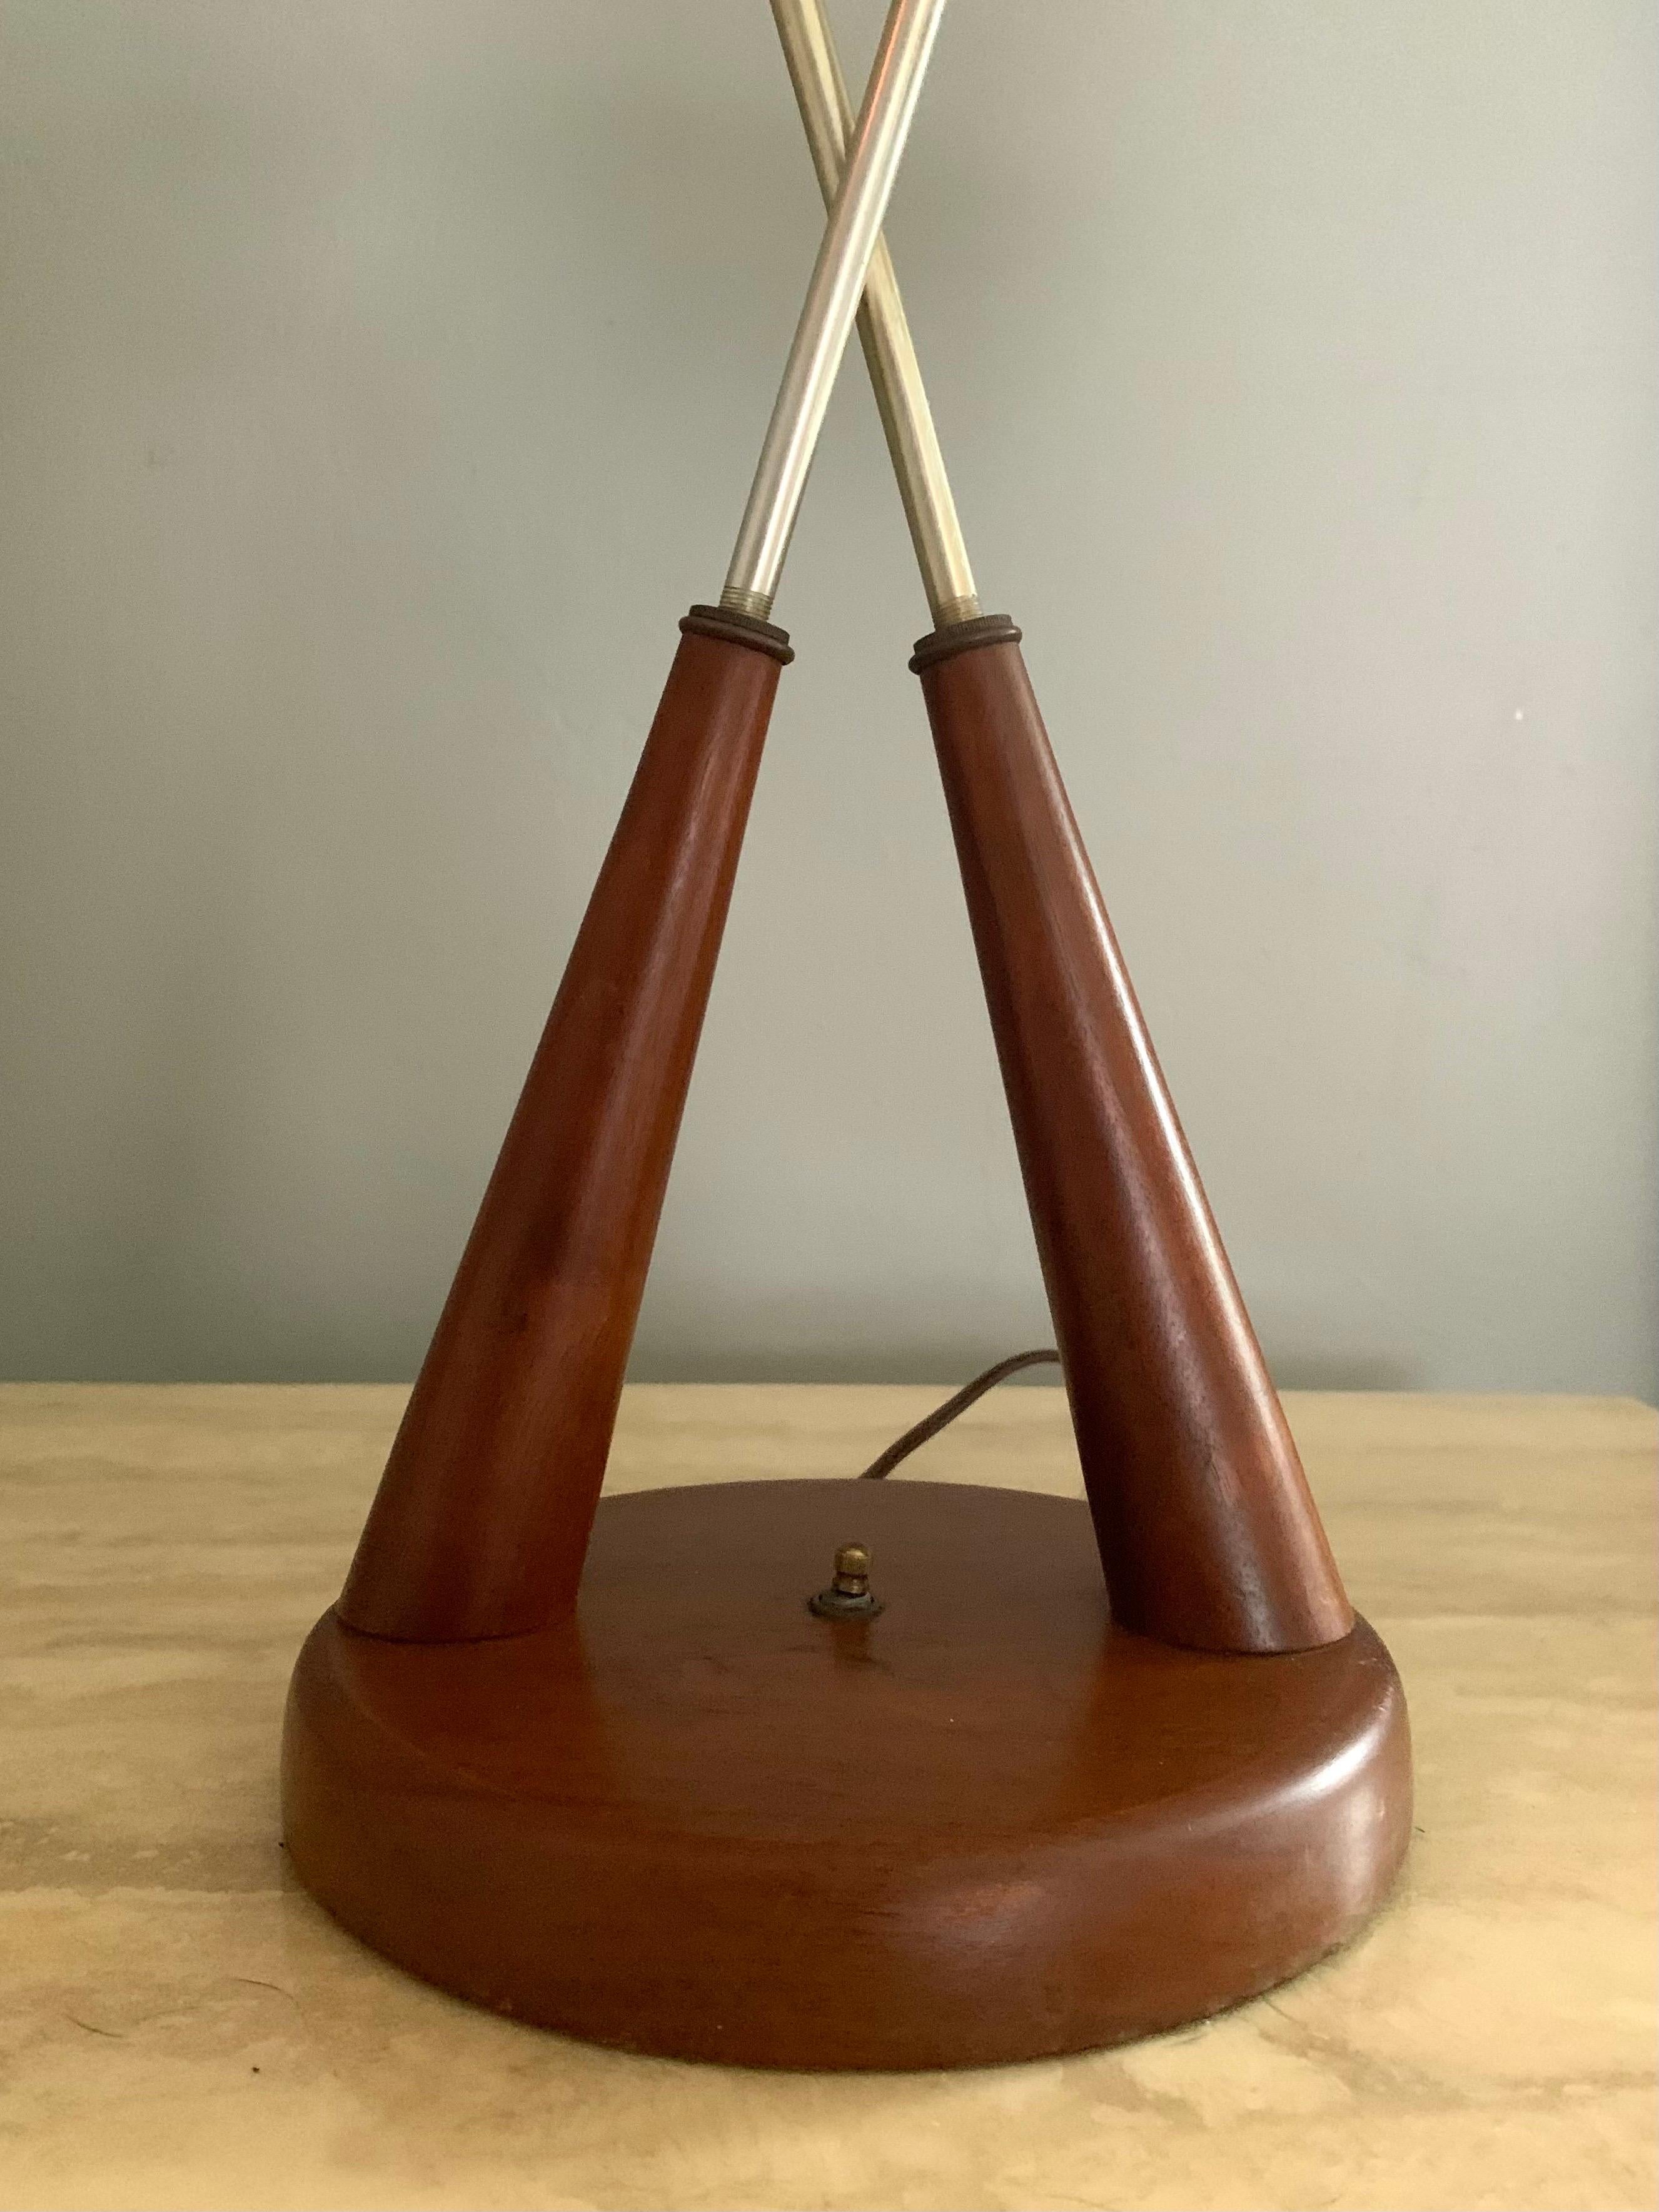 table lamp with two heads